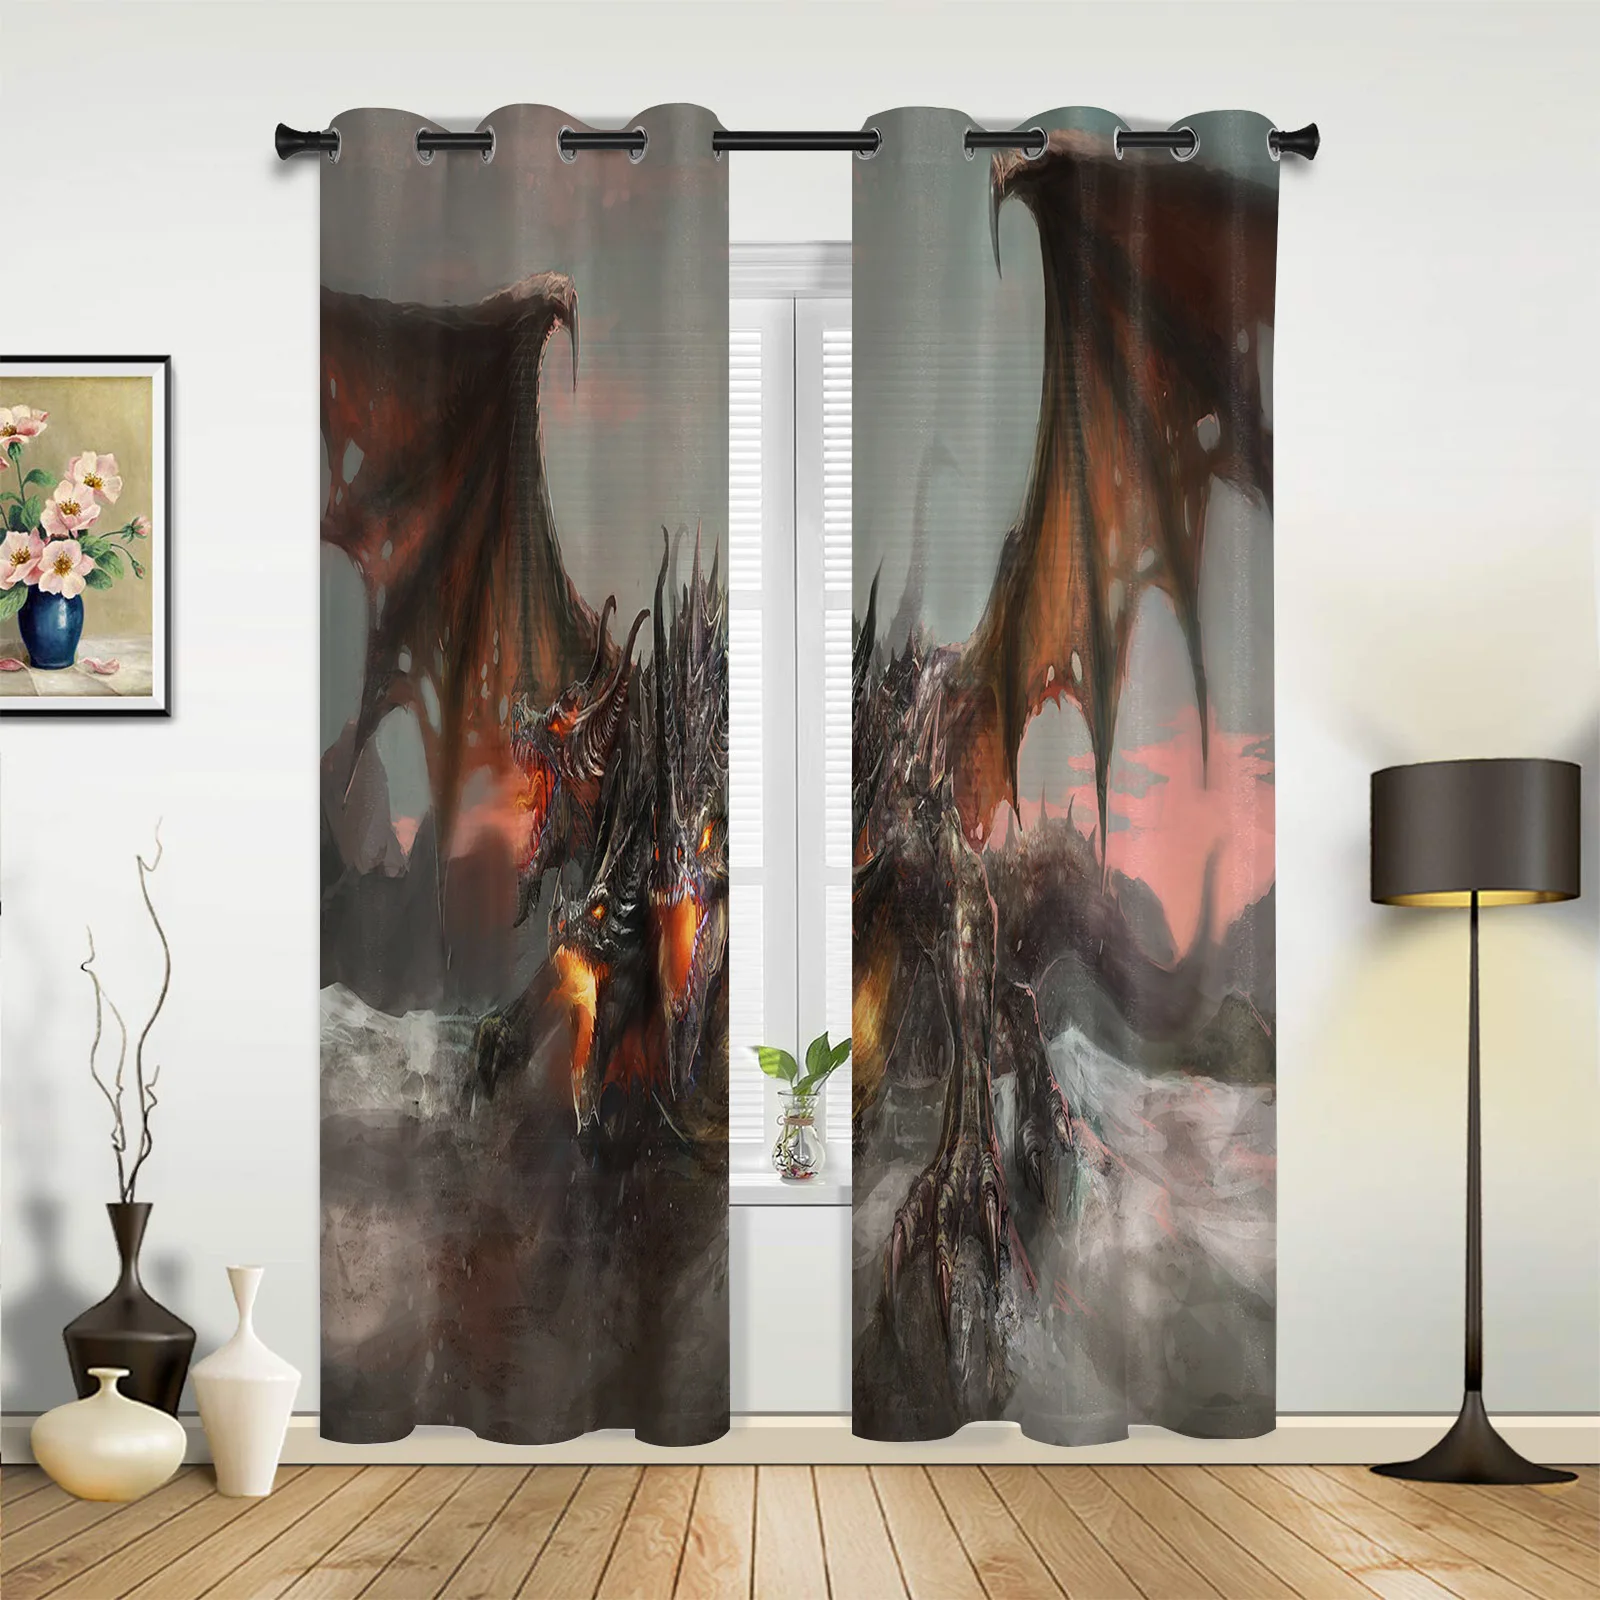 

Three Headed Western Dragon Curtains for Bedroom Living Room Drapes Kitchen Children's Room Window Curtain Modern Home Decor